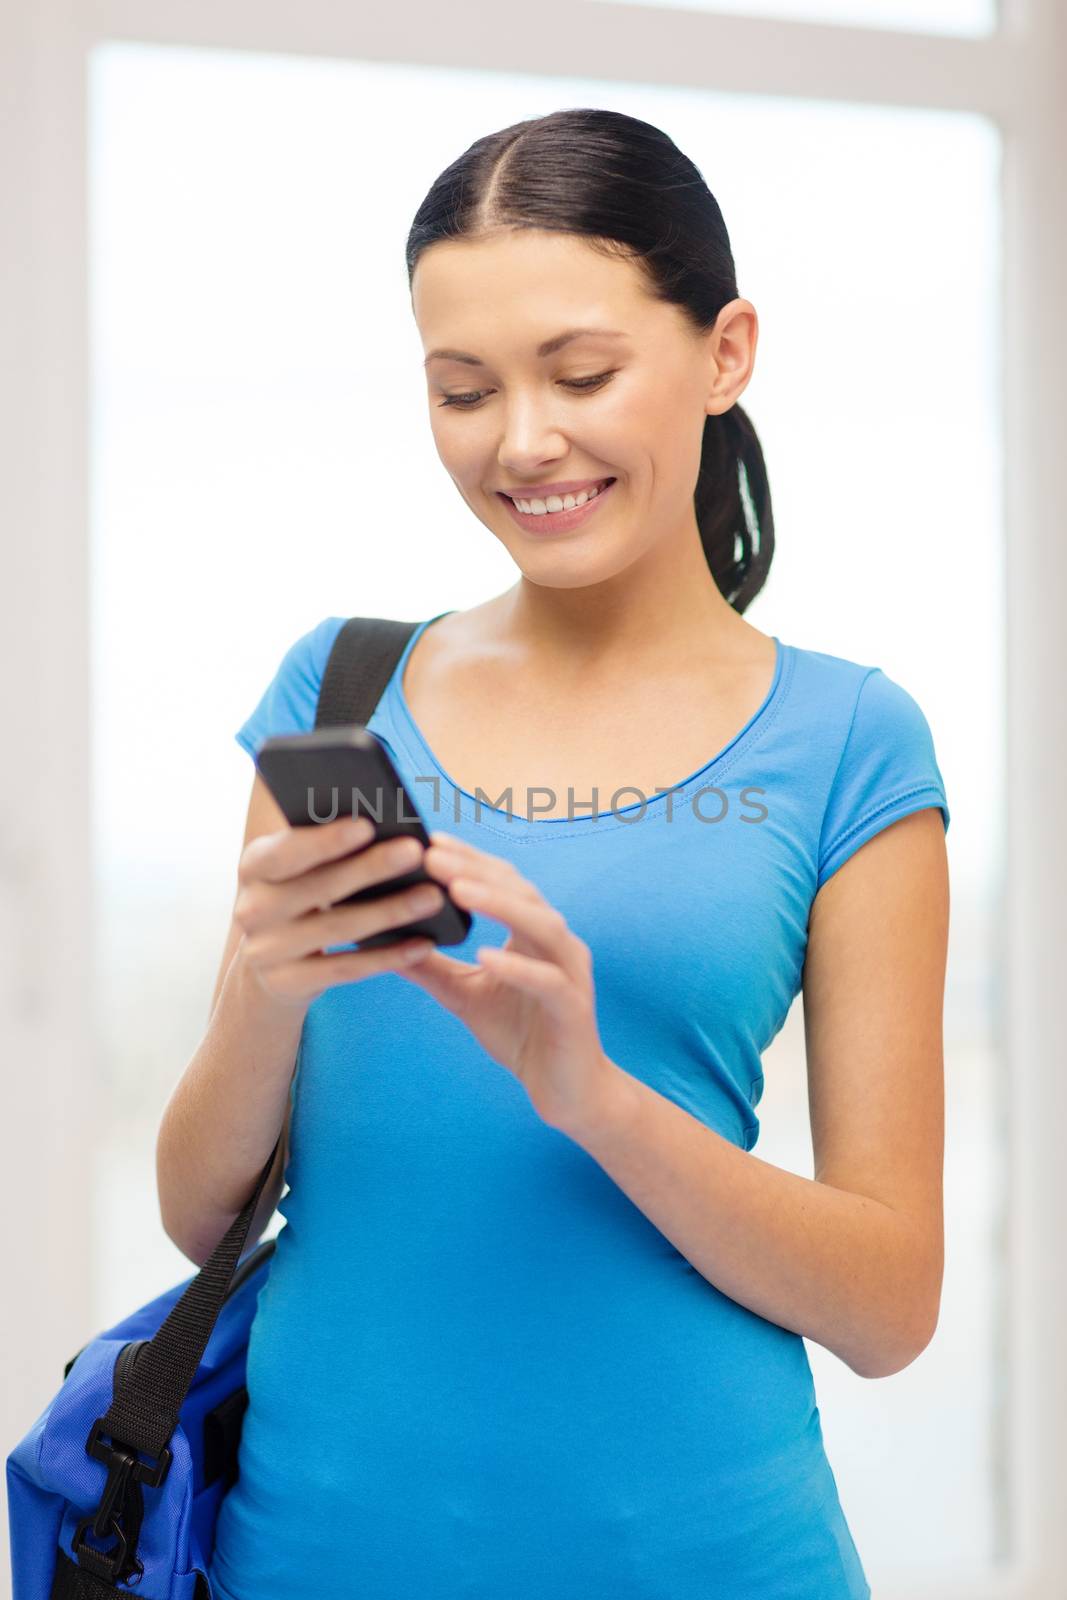 education, technology, communication and school concept - smiling female student with smartphone and bag at school